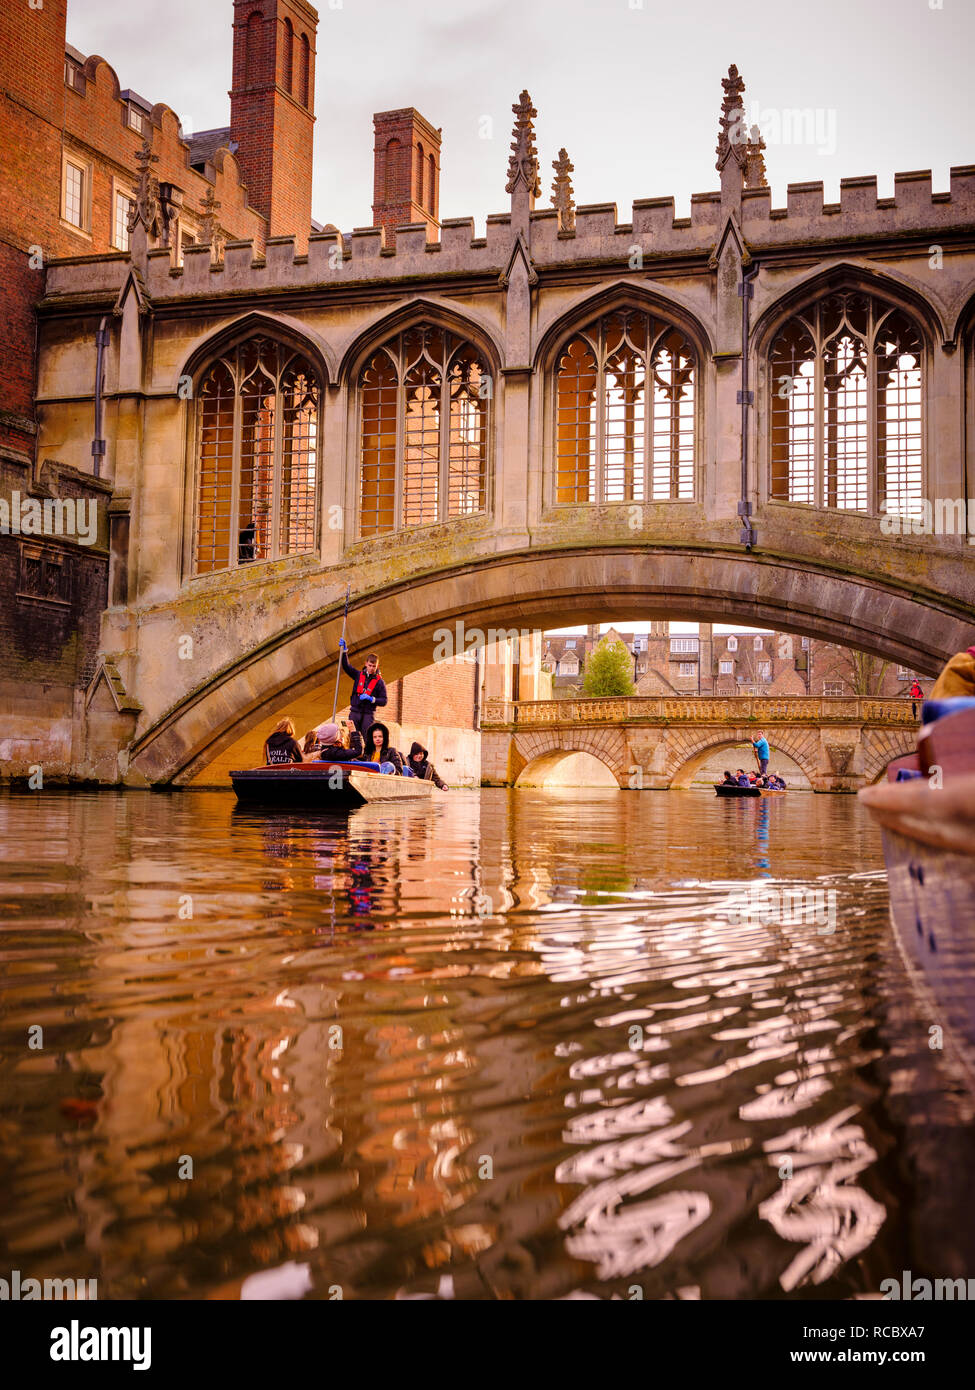 The Bridge of Sighs in Cambridge, a covered bridge at St John's College, Cambridge University. It was built in 1831 and crosses the River Cam. Stock Photo